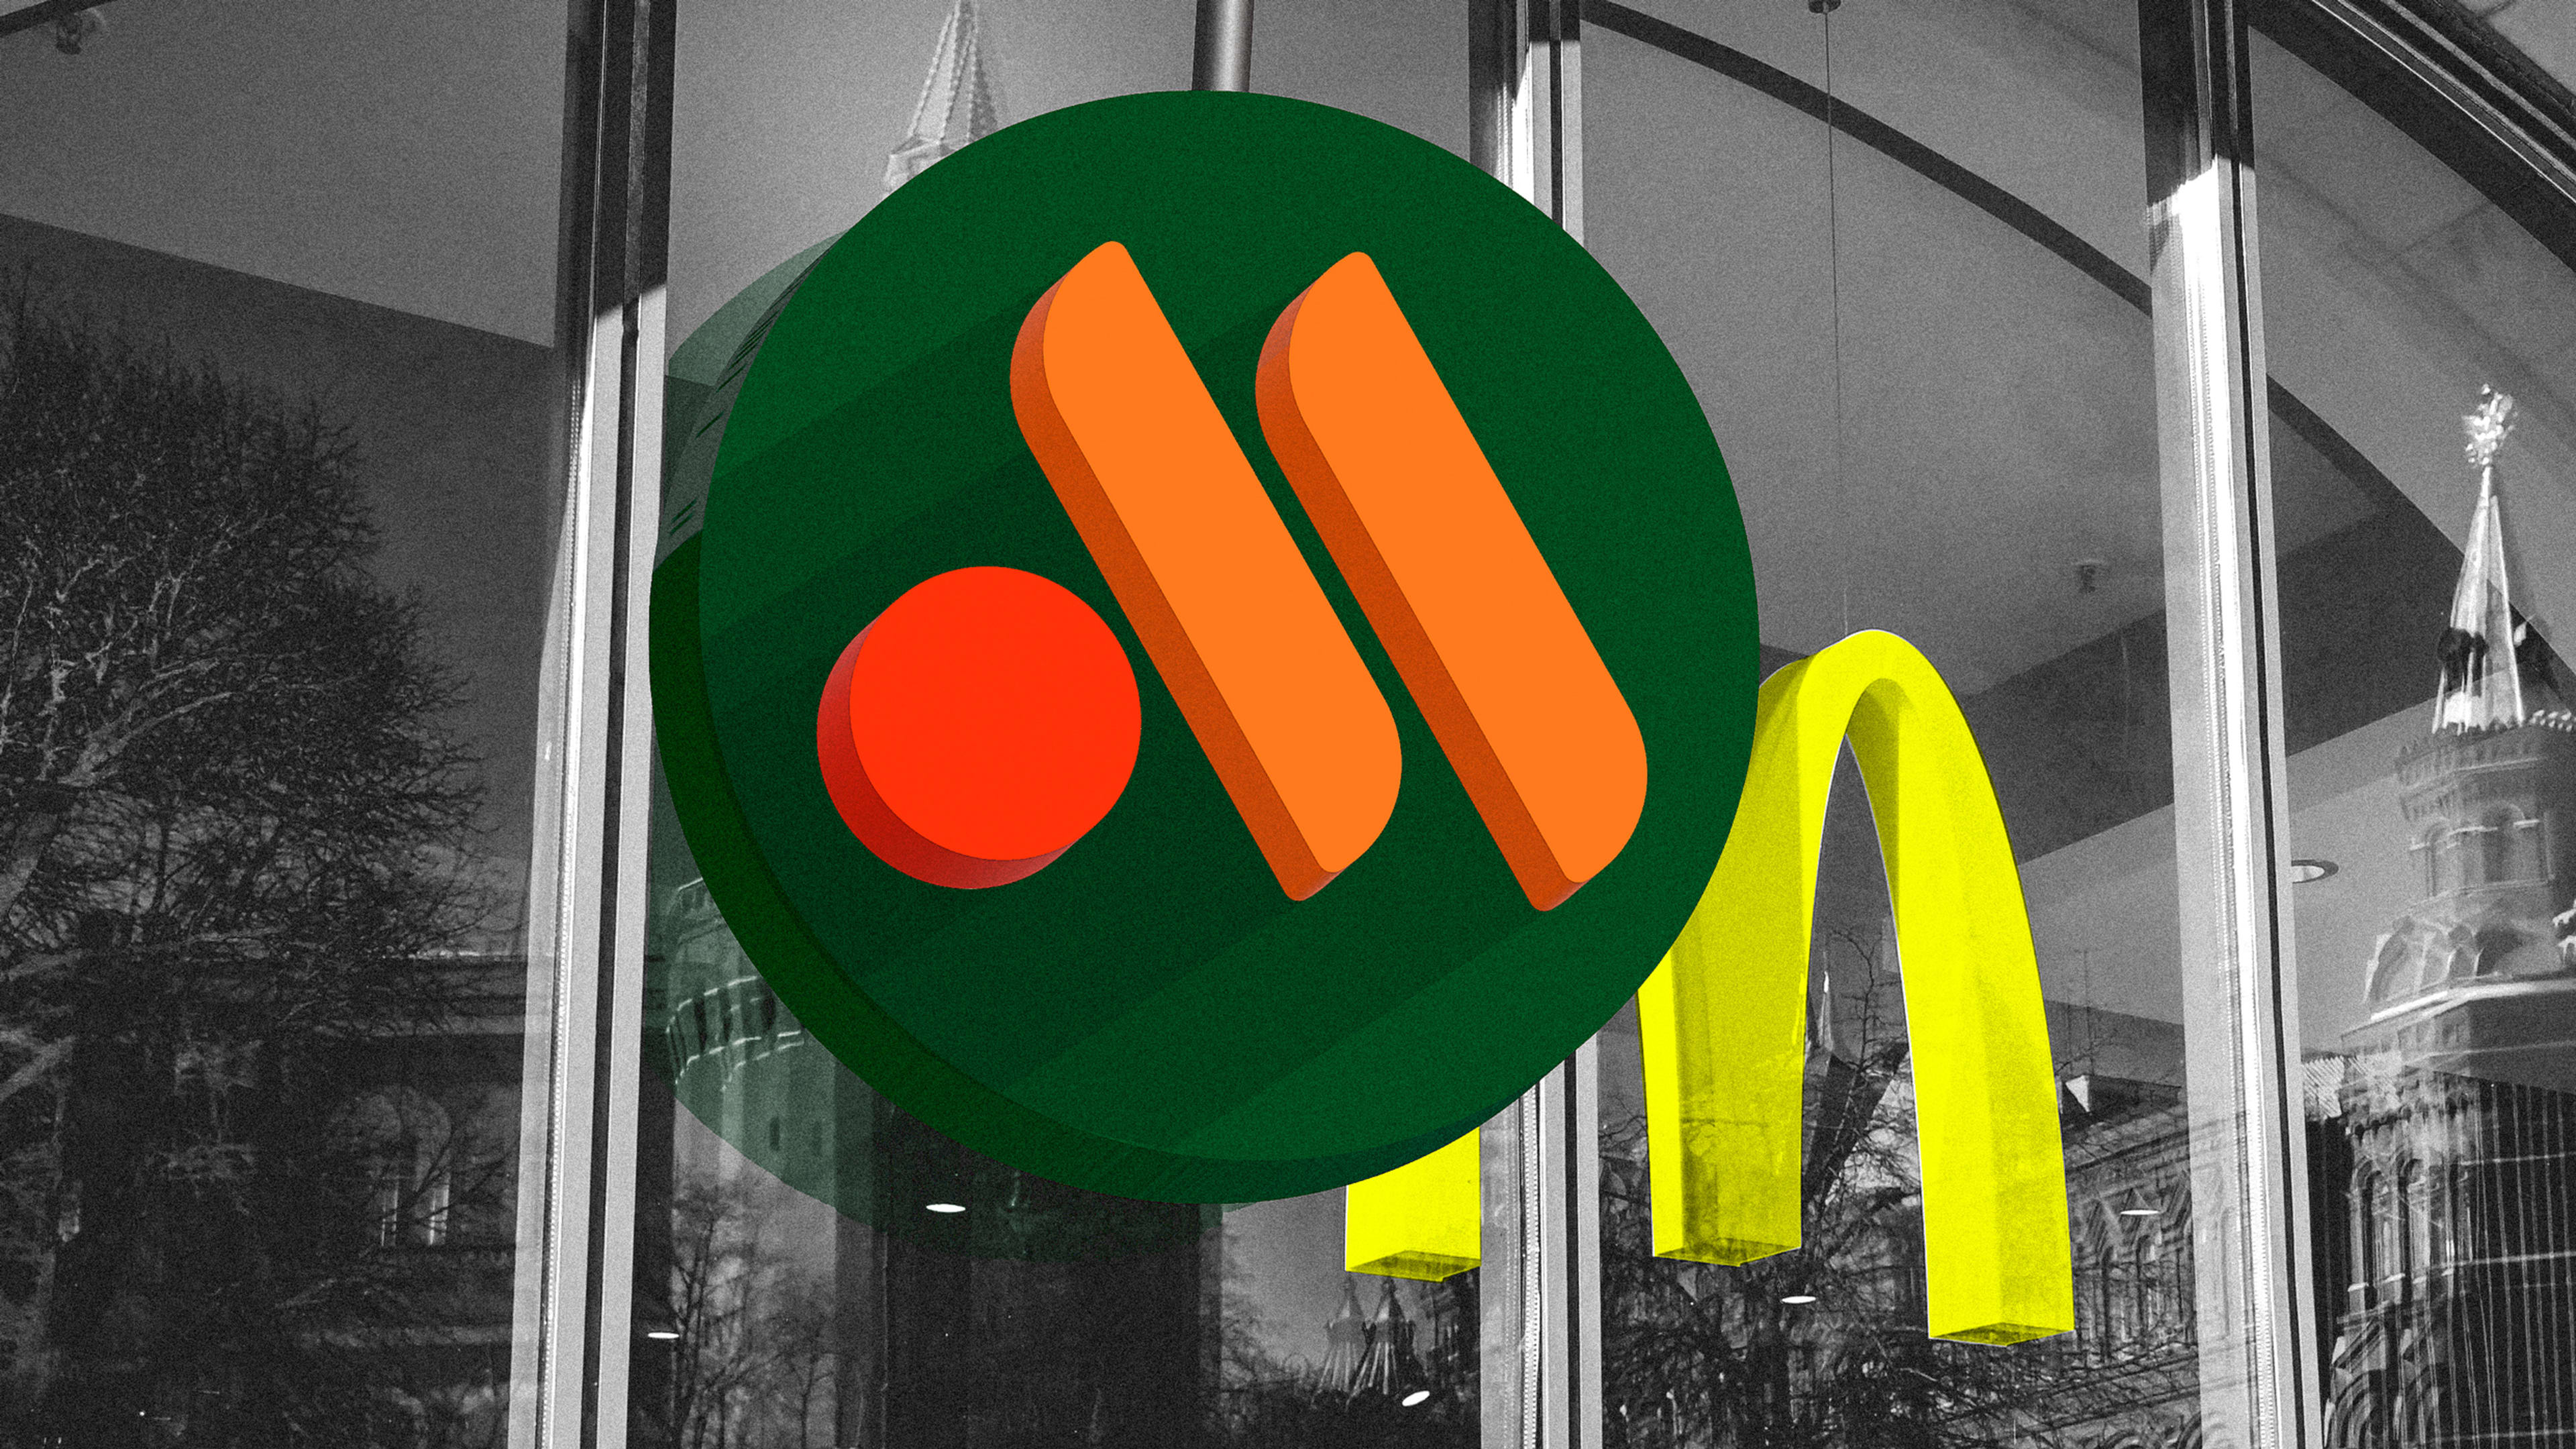 See the new ‘de-Arched’ McDonald’s logo in Russia